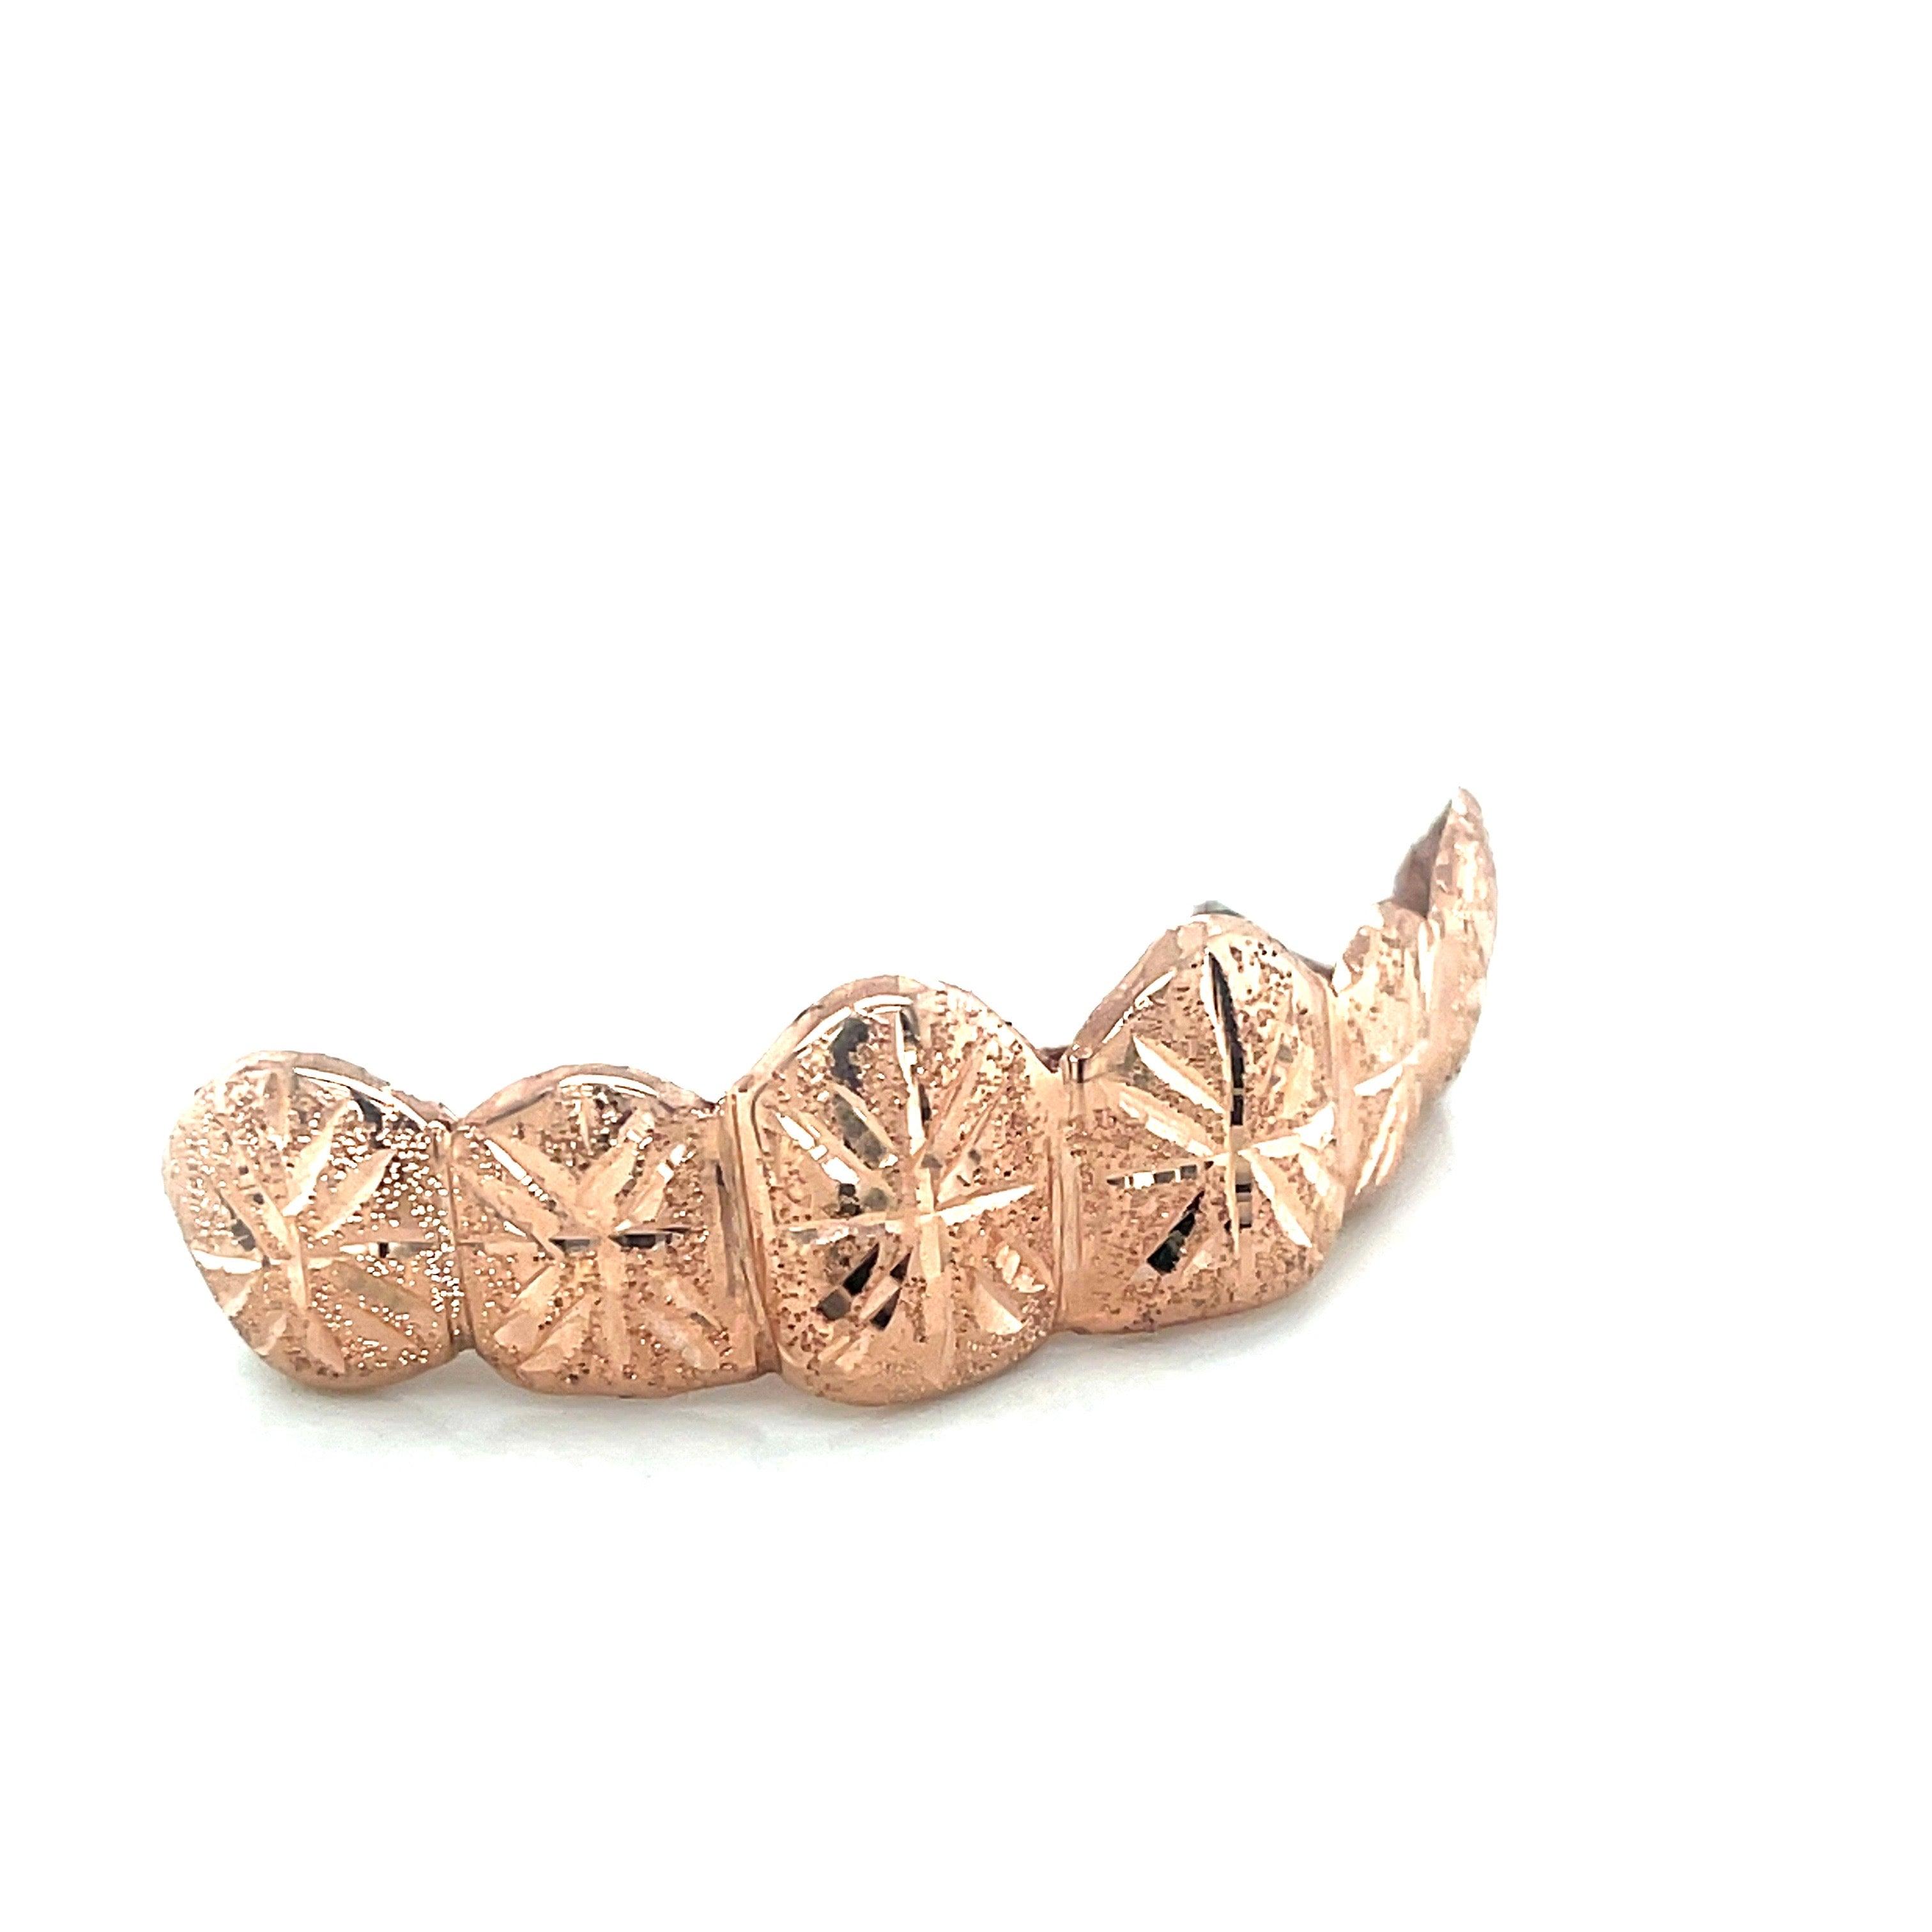 6pc Rose Gold Snowfall Top Grillz - Seattle Gold Grillz